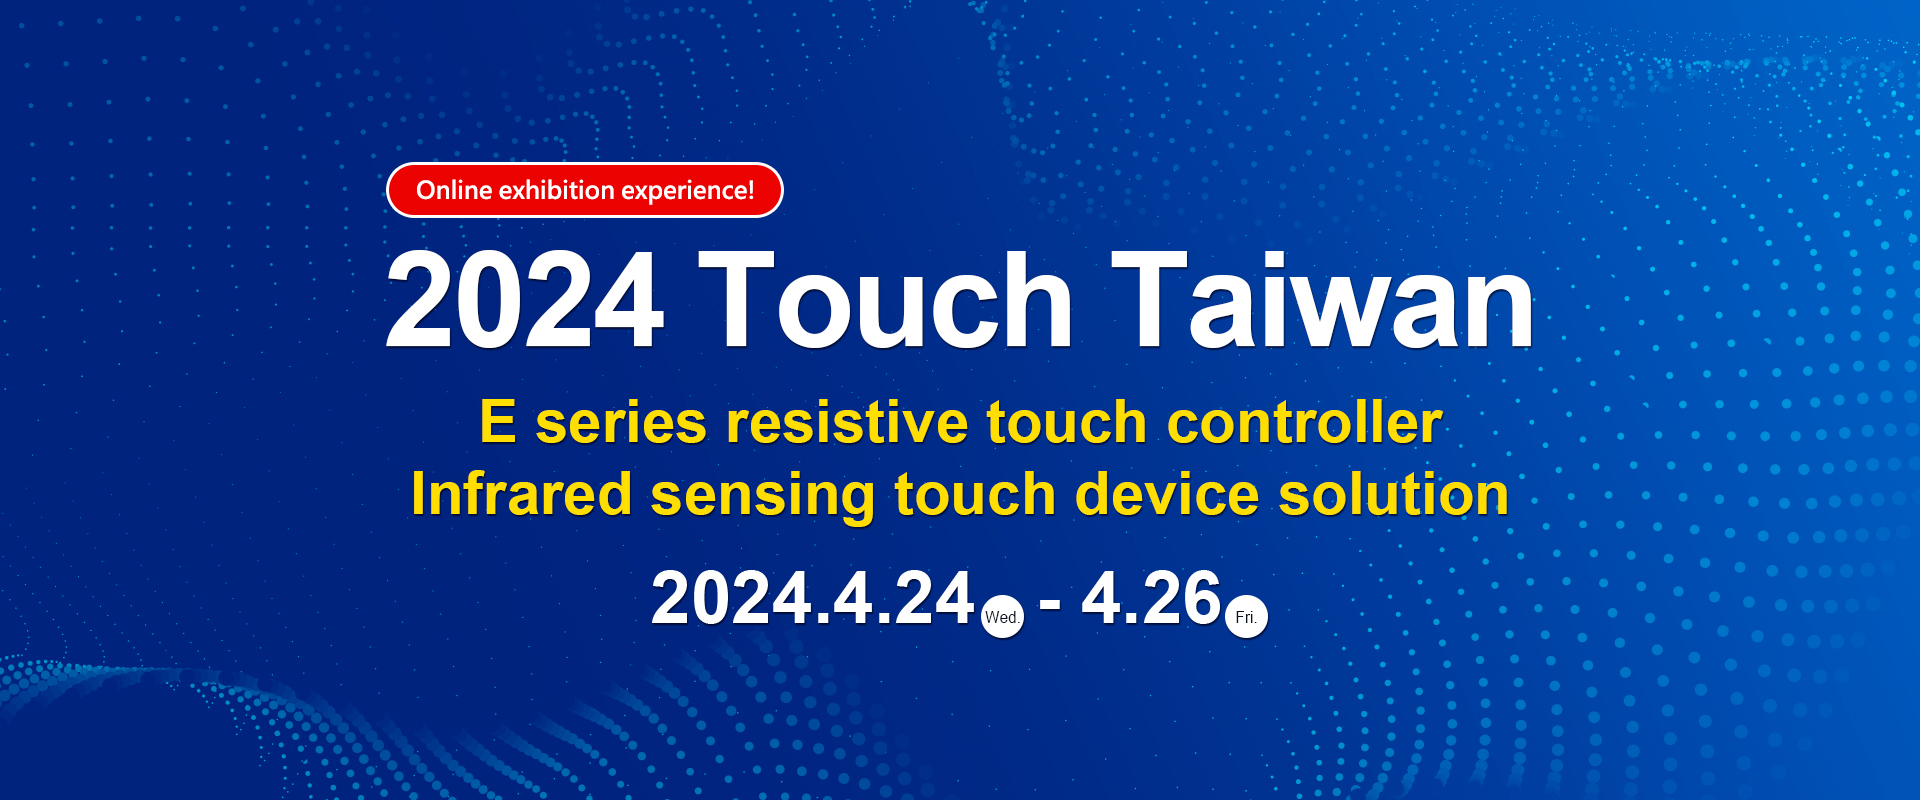 Online Exhibition- ET&T Technology｜2024 Touch Taiwan: 4/24(Wed.) - 4/26(Fri.)